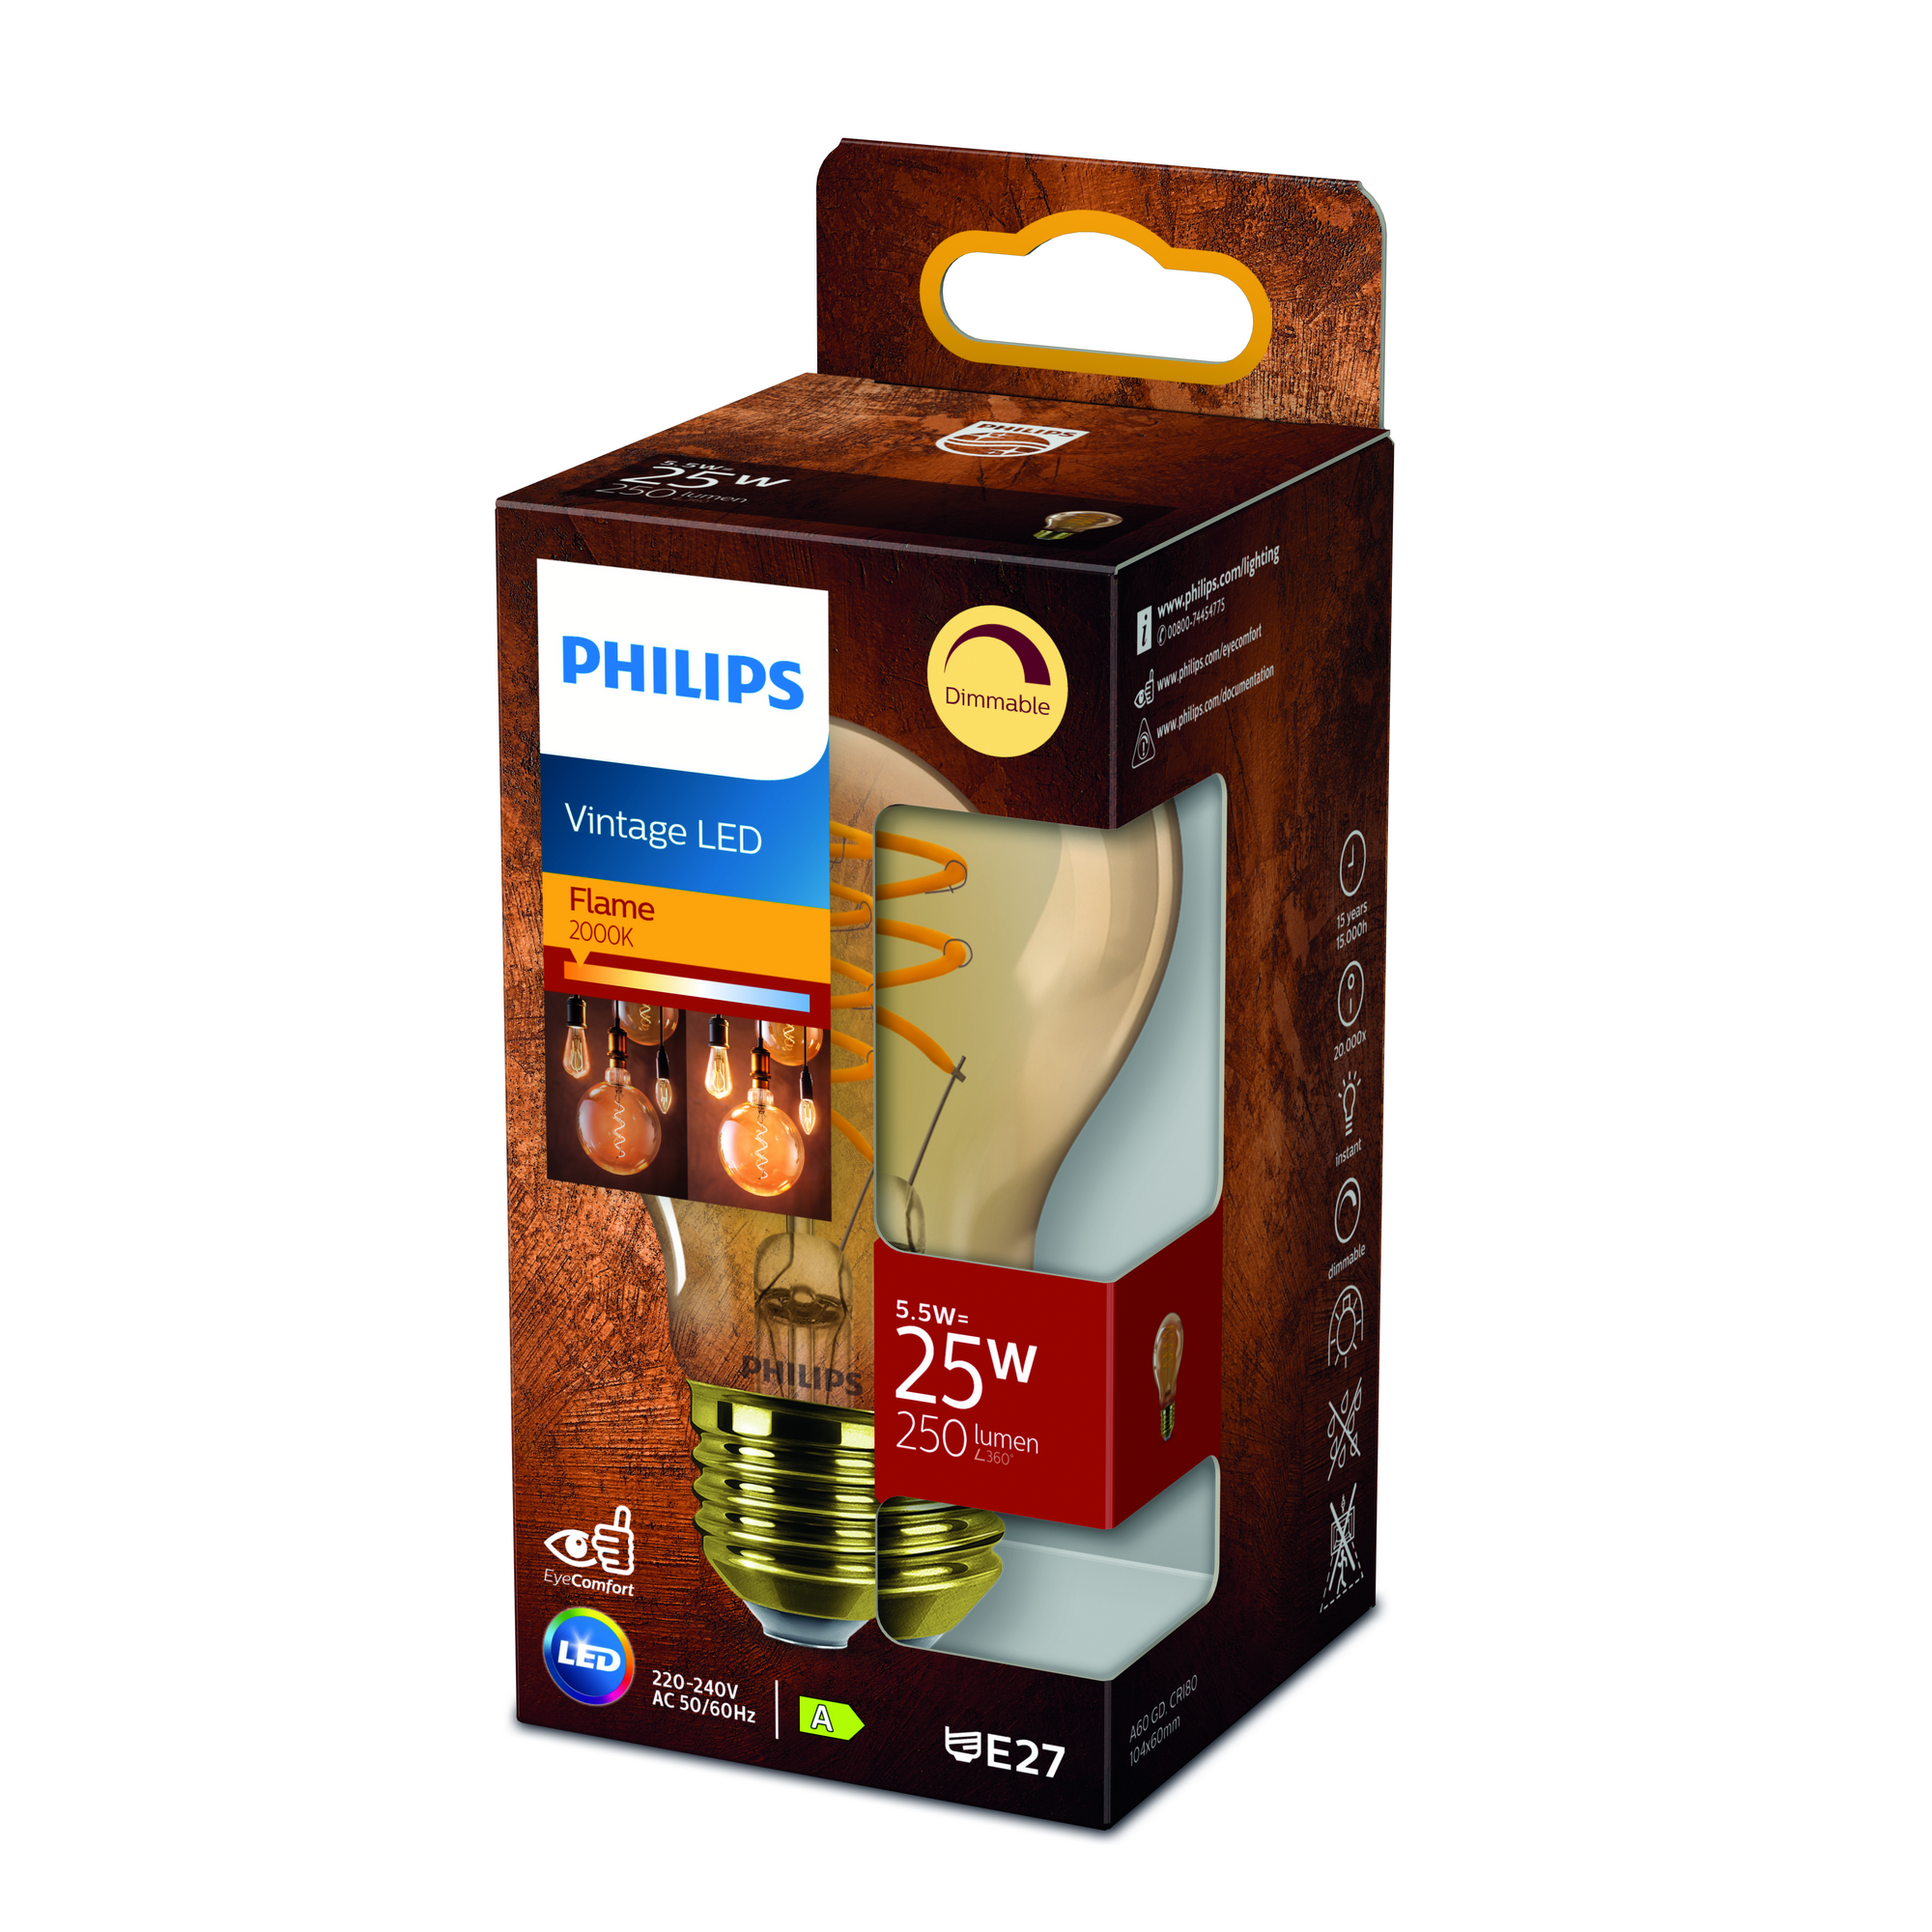 LED classic A60 gold 5,5W E27 warmweiß 250 lm + product picture